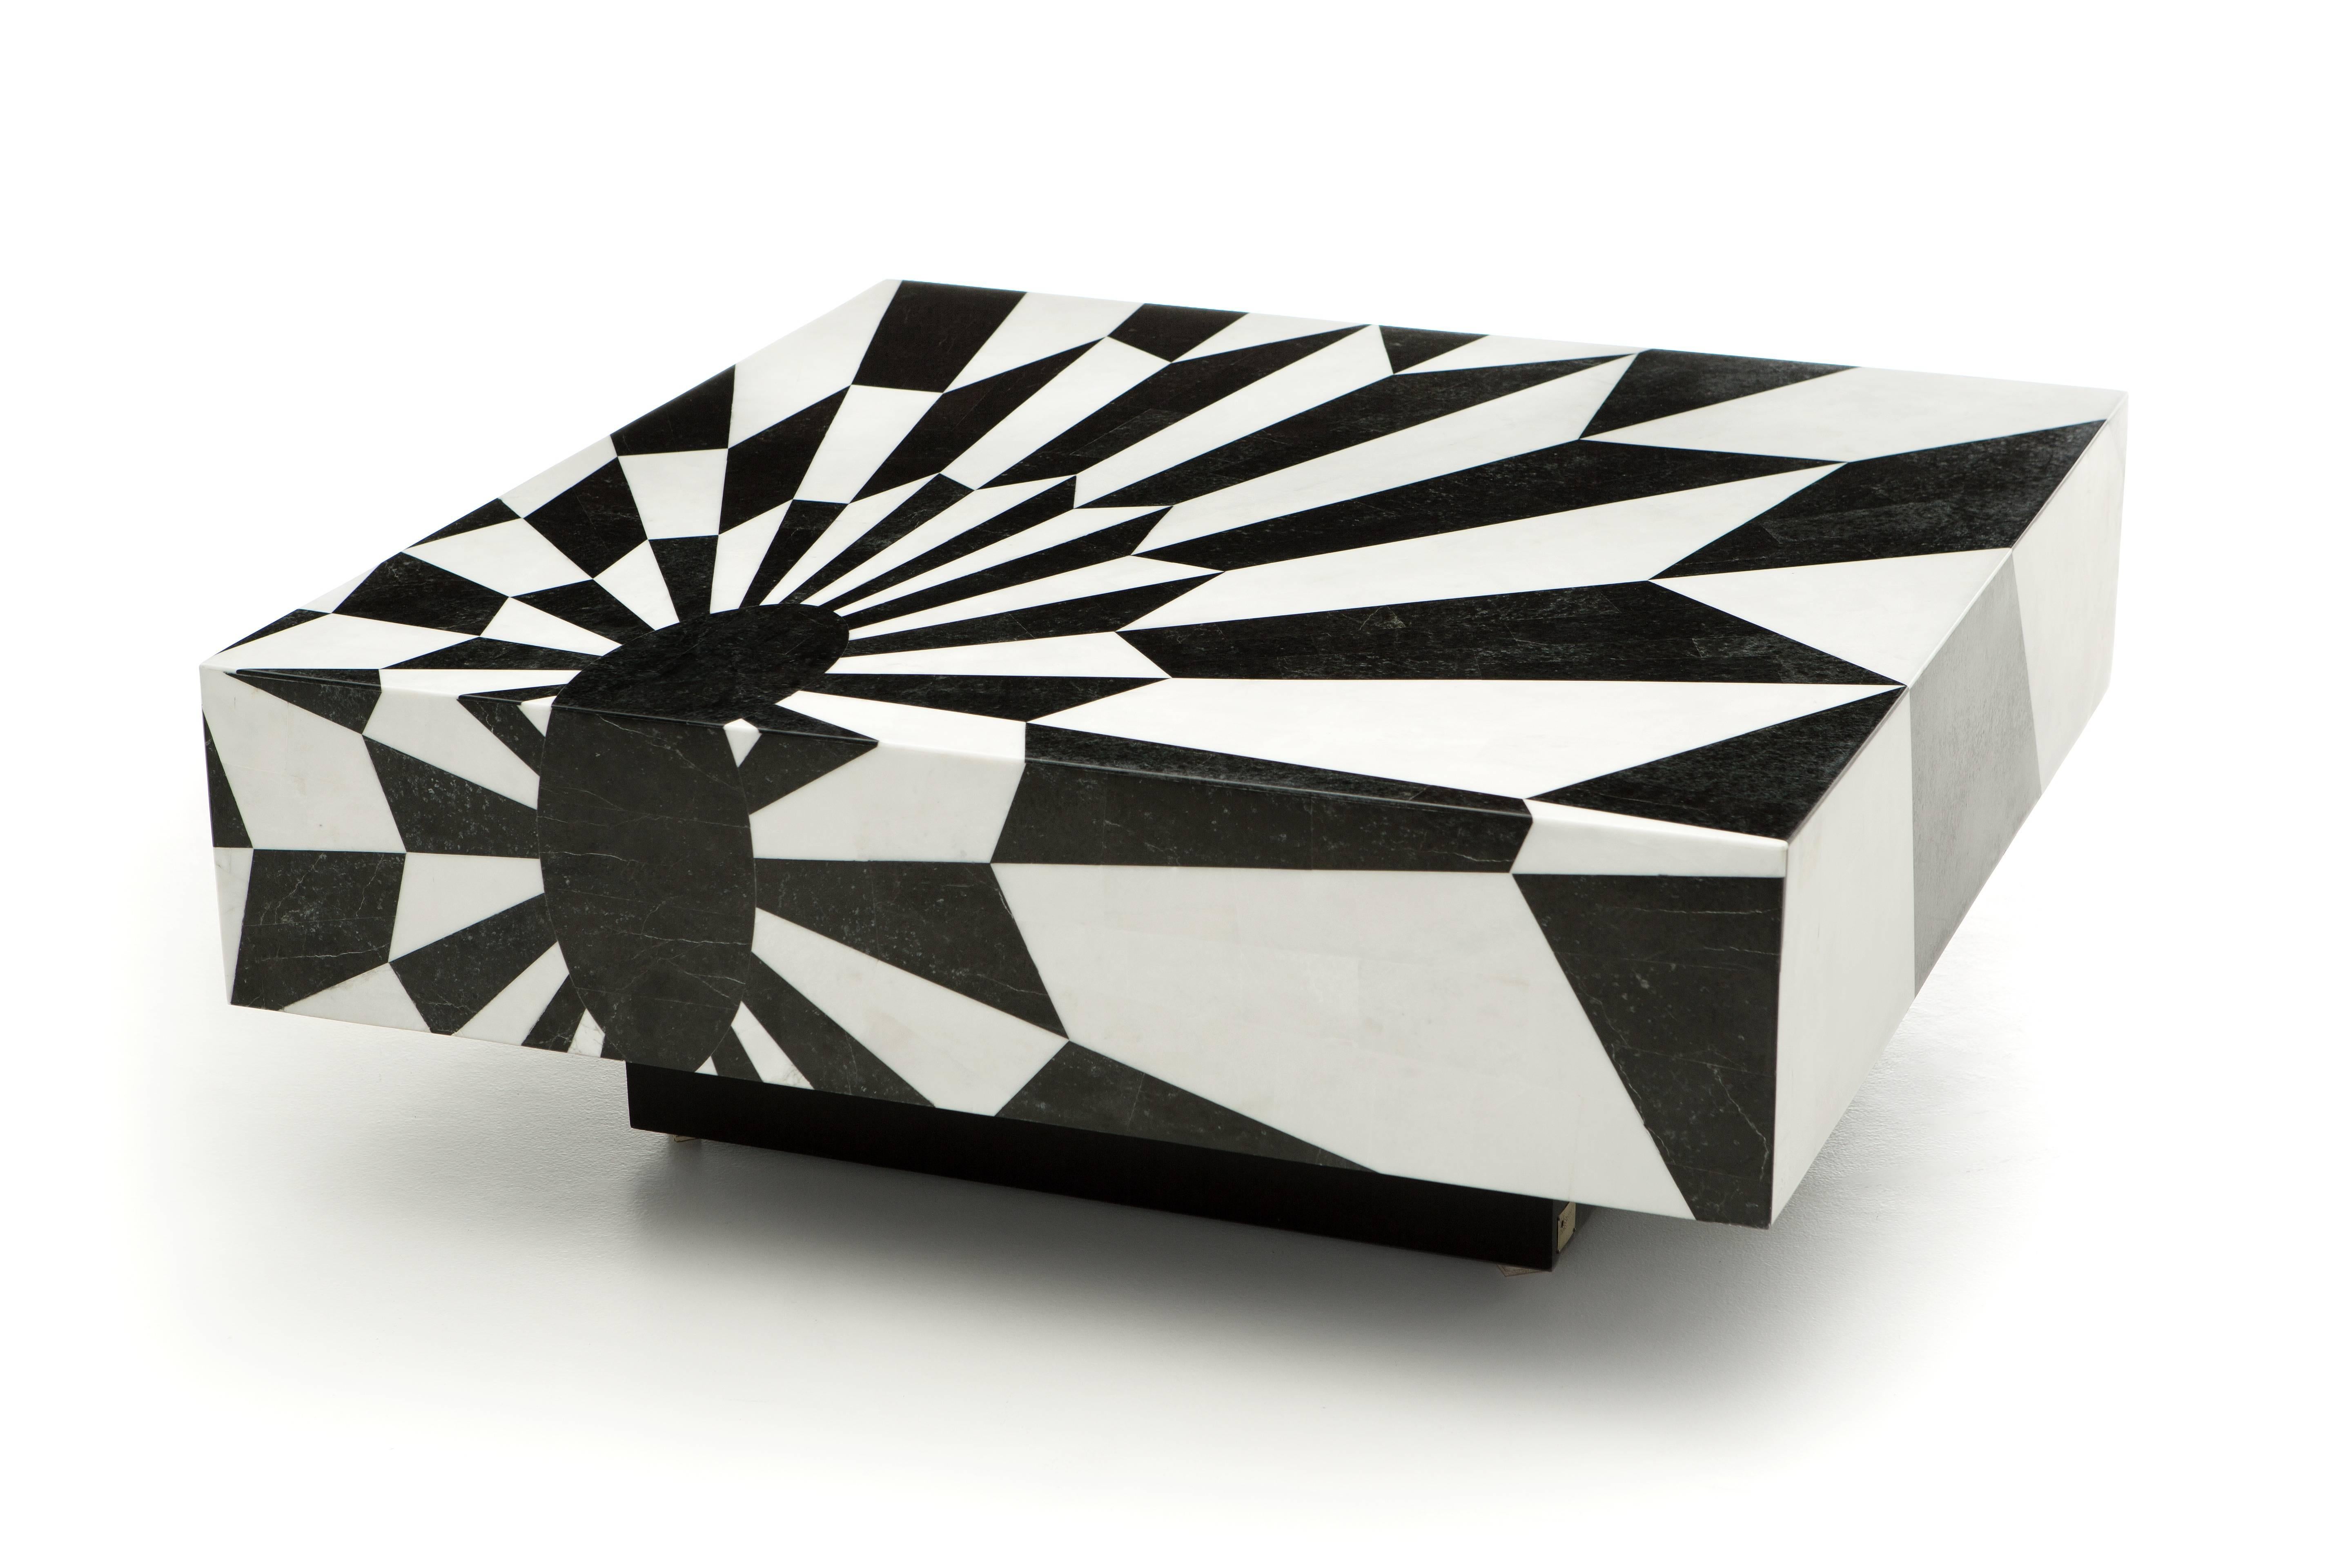 This striking coffee table, part of the ‘Rive Gauche’ collection is covered in magnificent black and white marble marquetry geometric pattern. This noble technique consists of hand-cutting of perfectly shaped fine pieces of marble and inlaying them